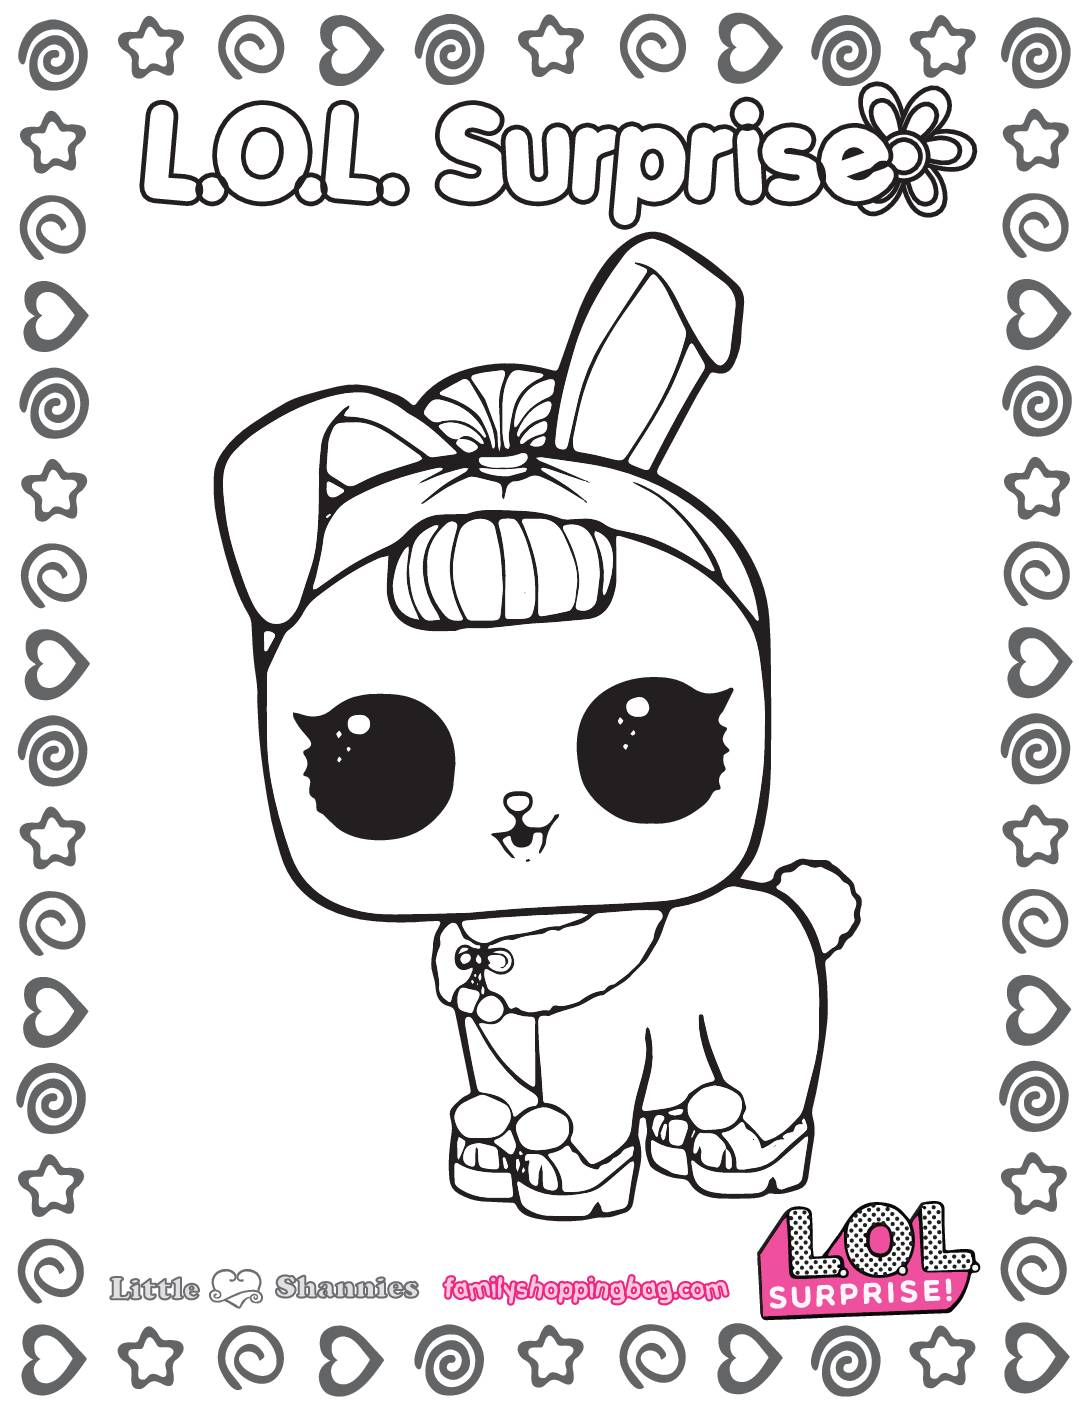 Lol Surprise Coloring Page 2 Coloring Pages